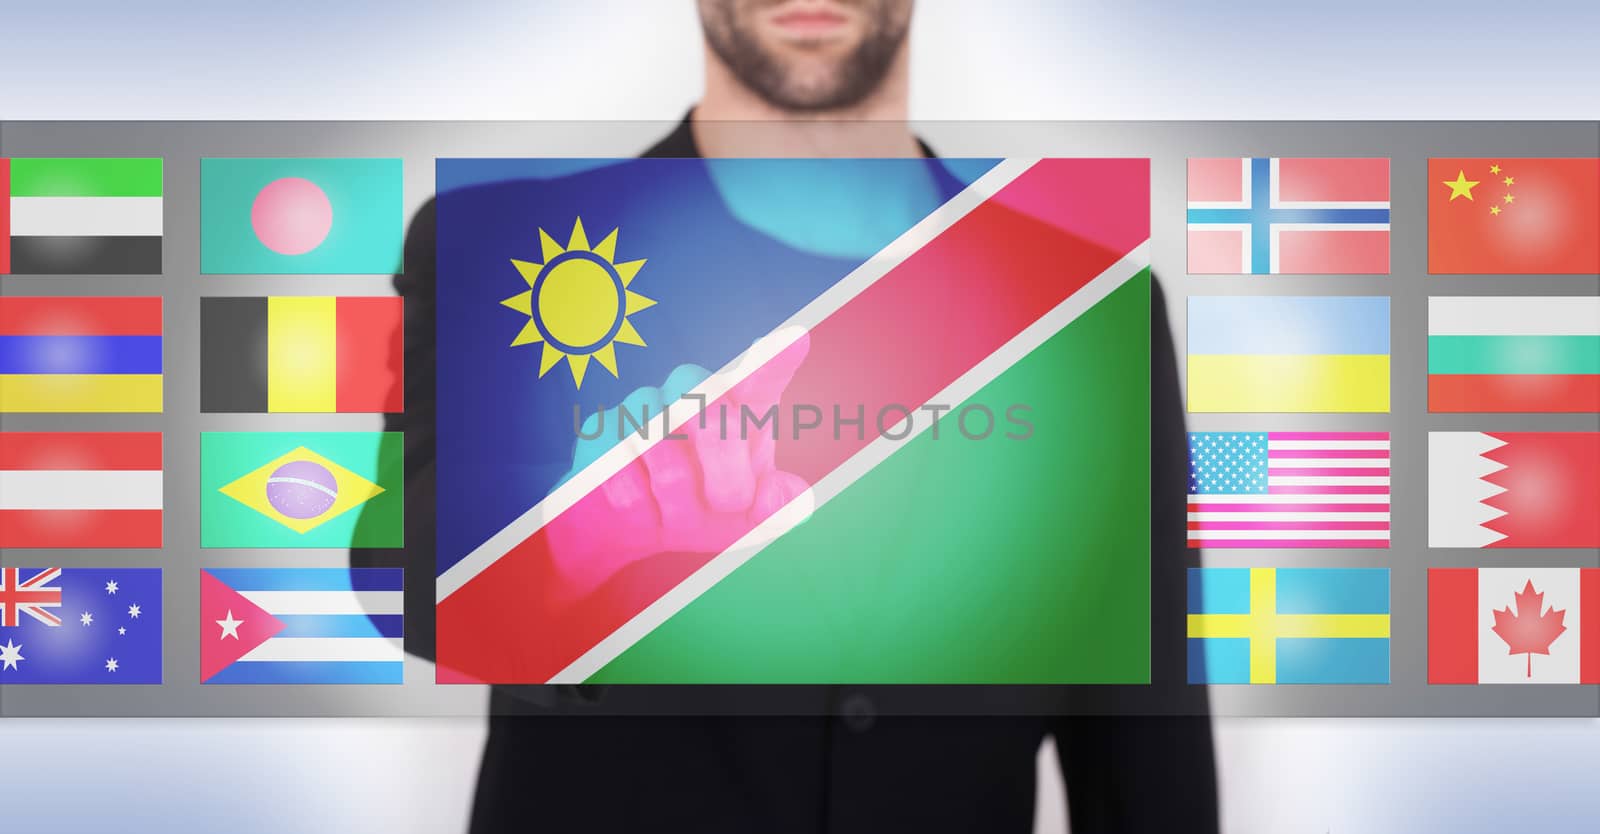 Hand pushing on a touch screen interface, choosing language or country, Namibia